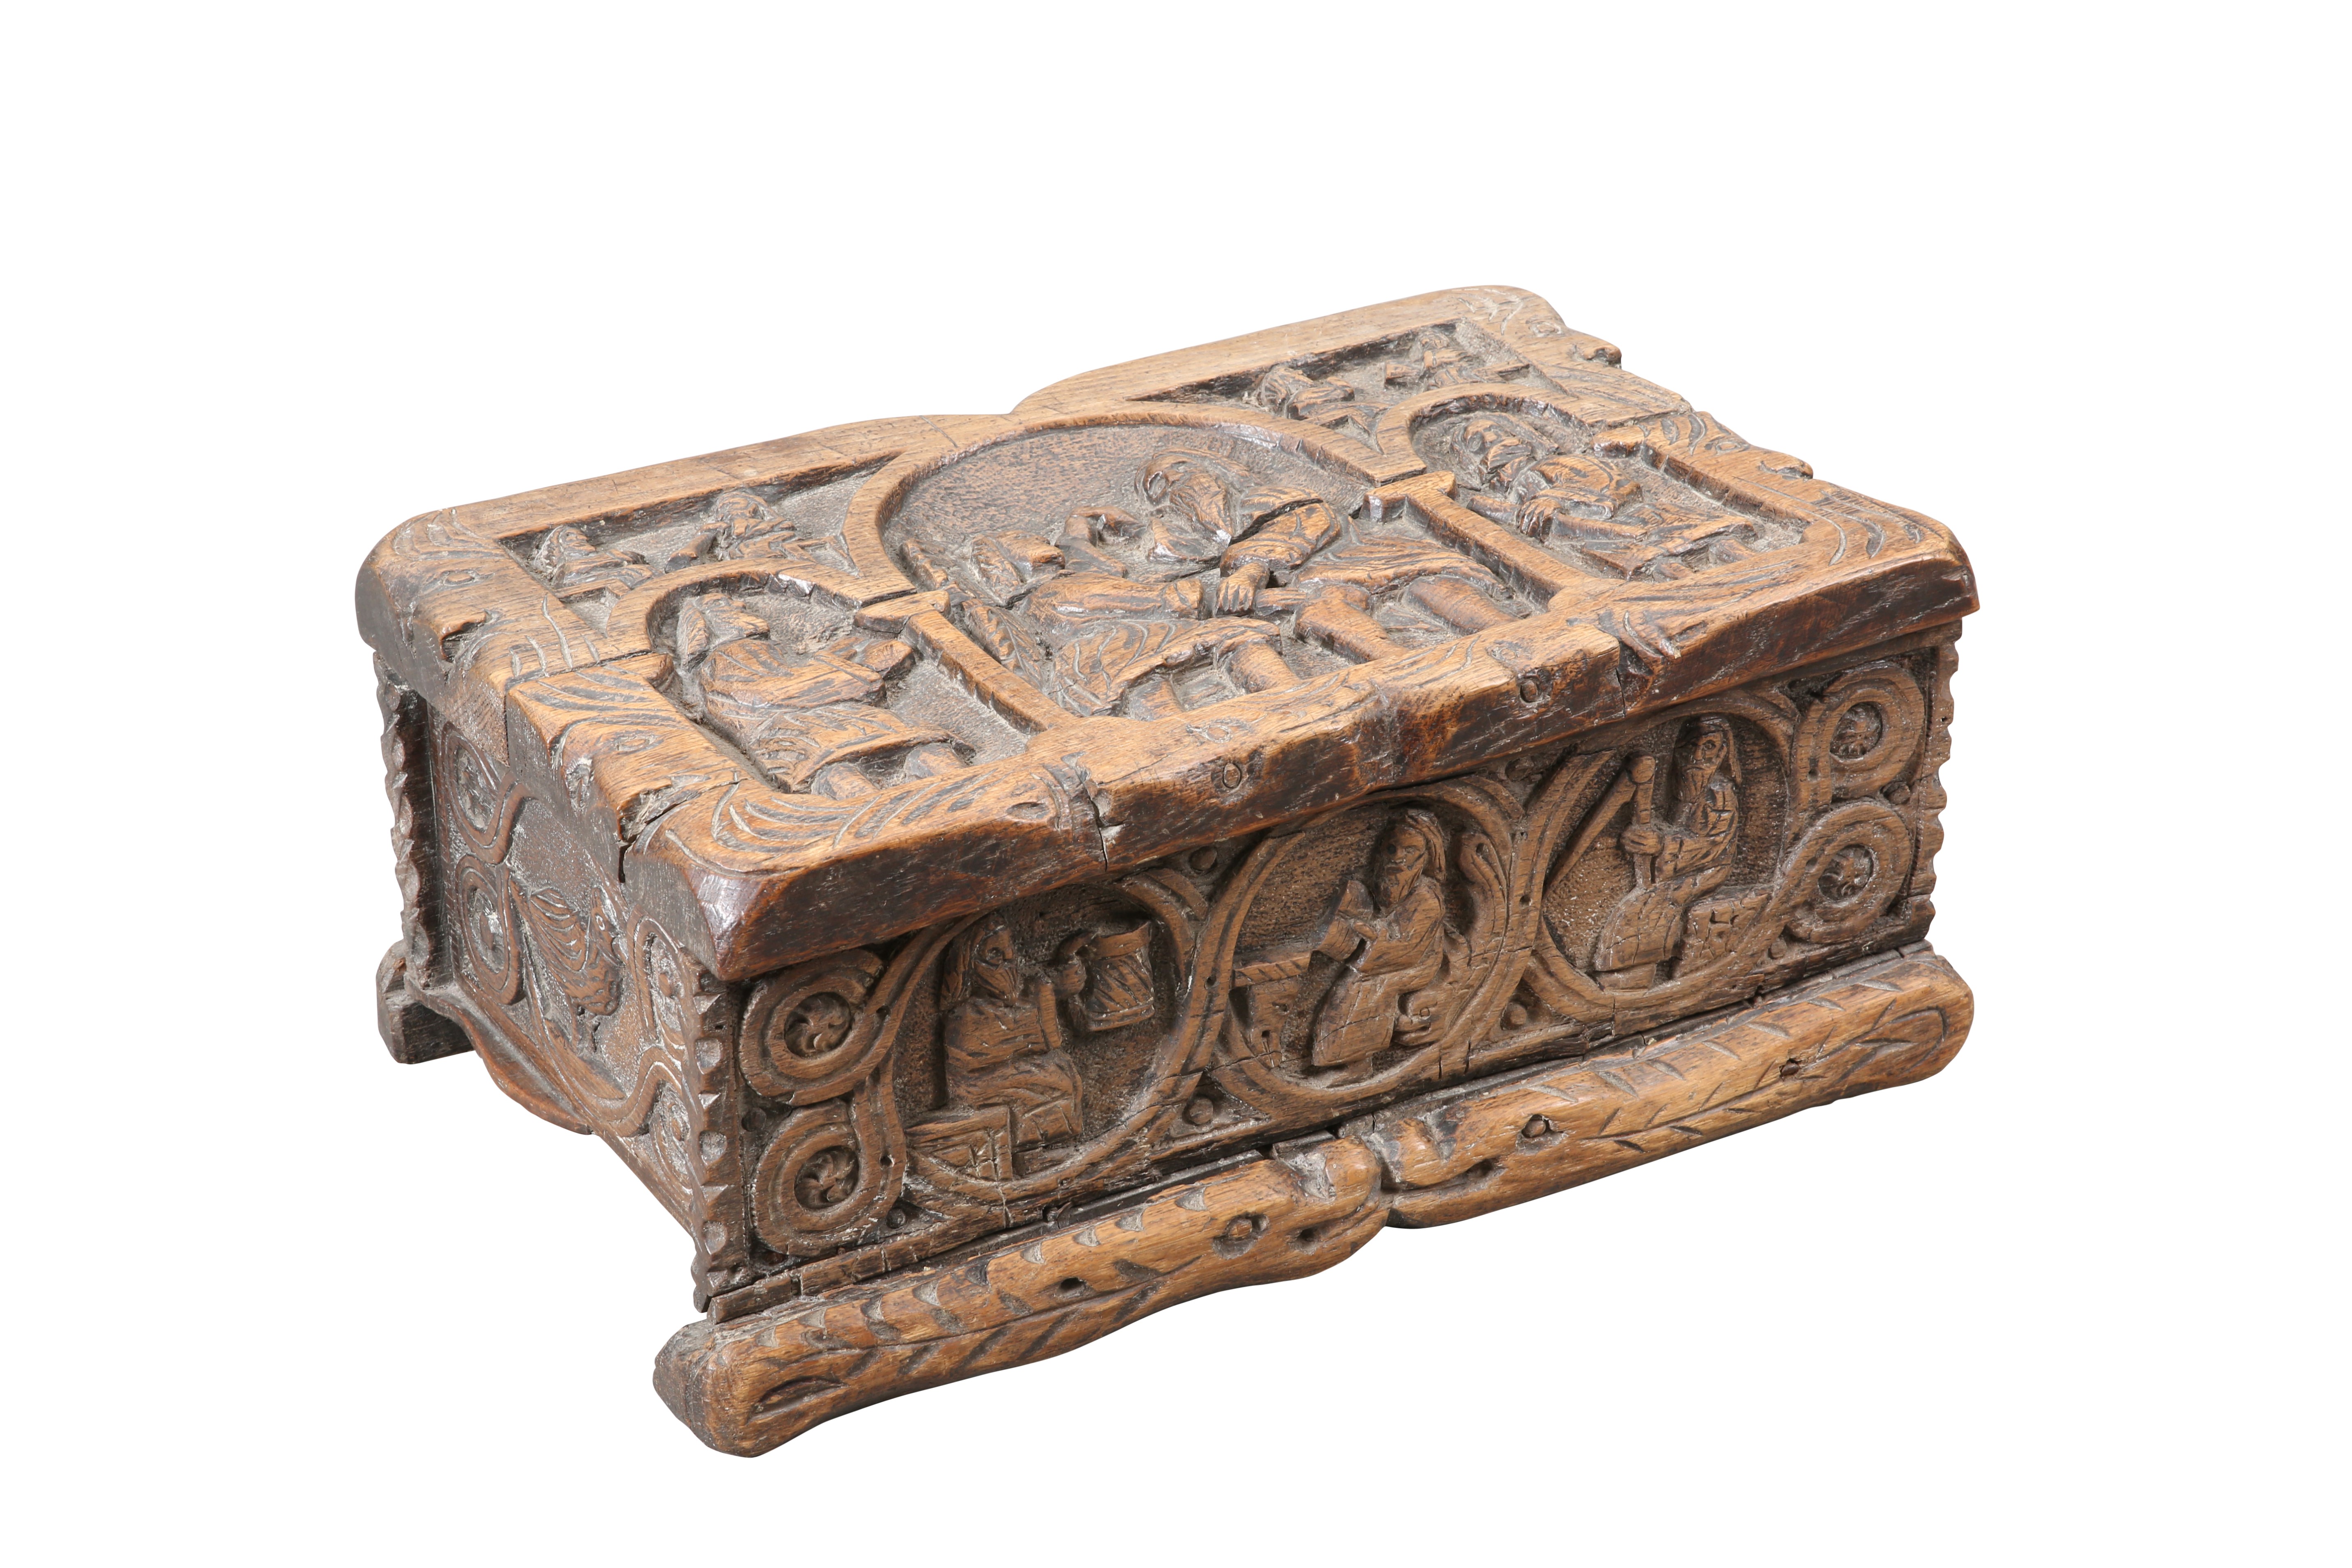 A CARVED OAK TABLE BOX, PROBABLY 17TH CENTURY